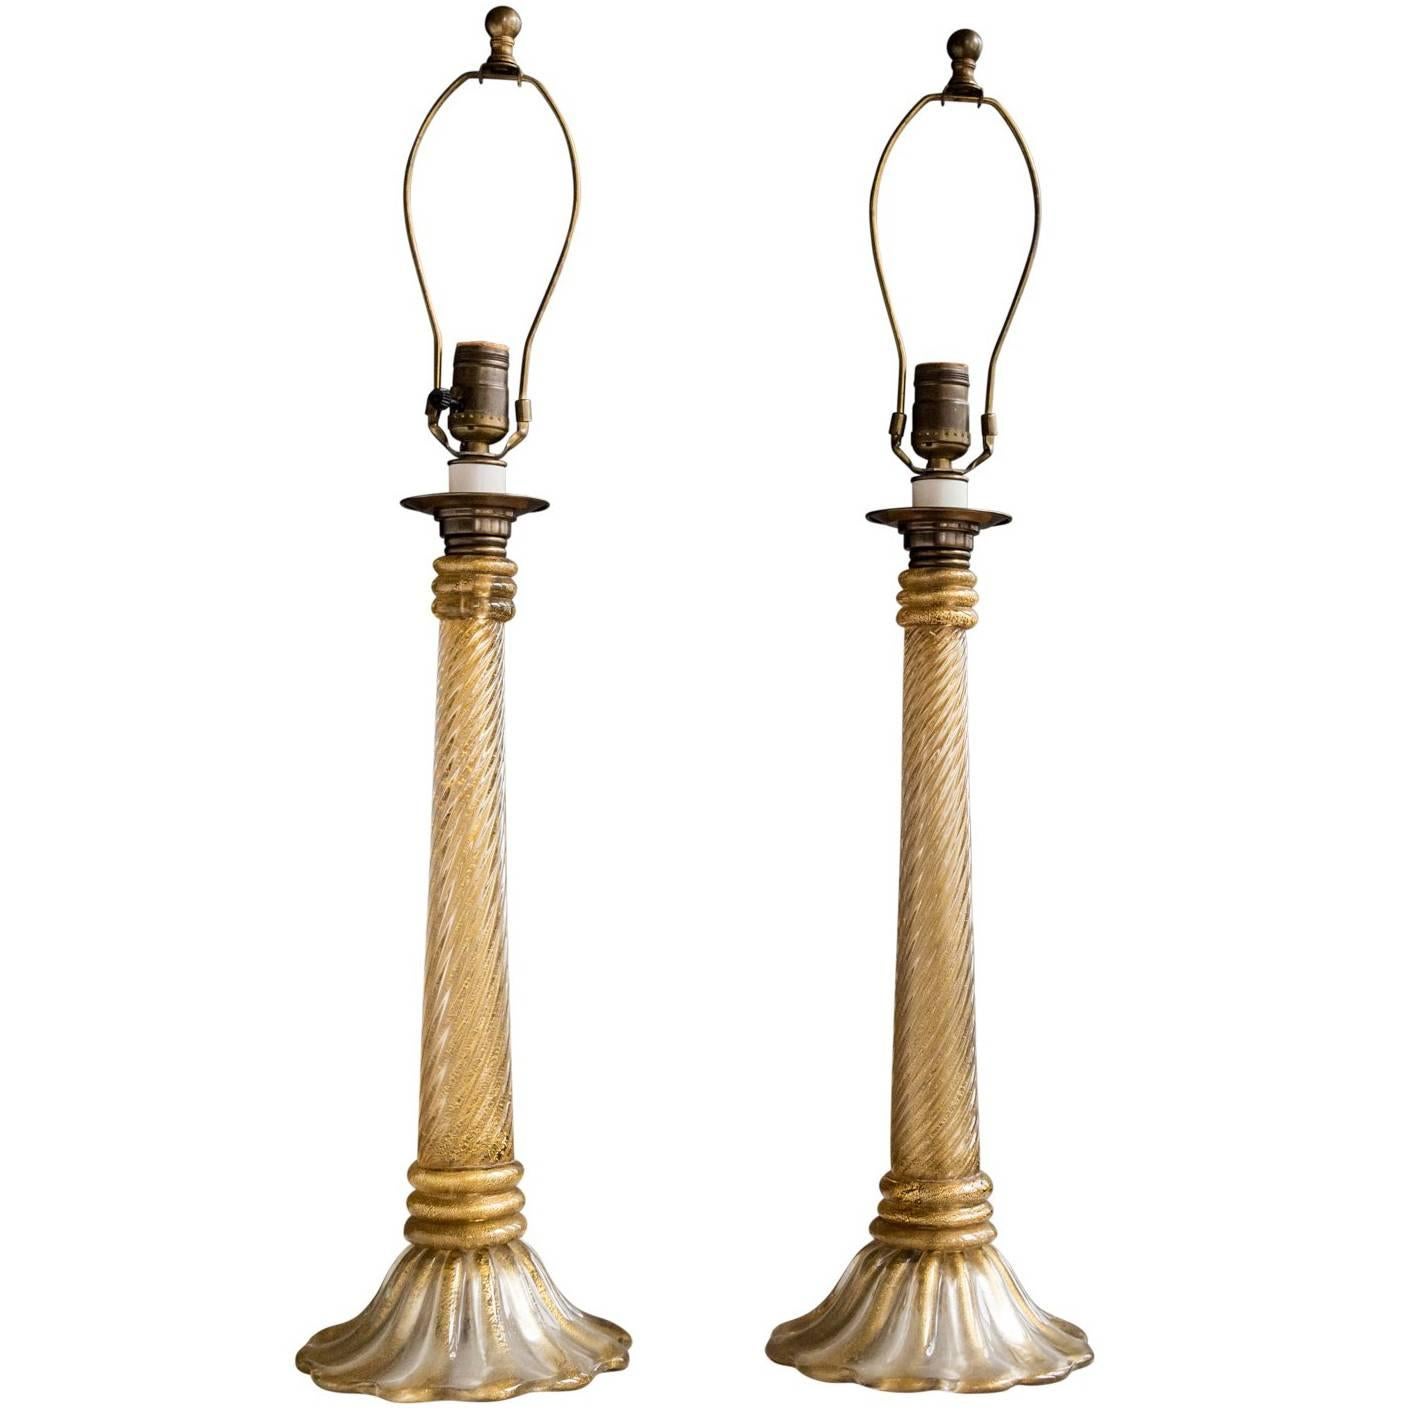 Pair of Murano Glass Table Lamps by Barovier and Tosso